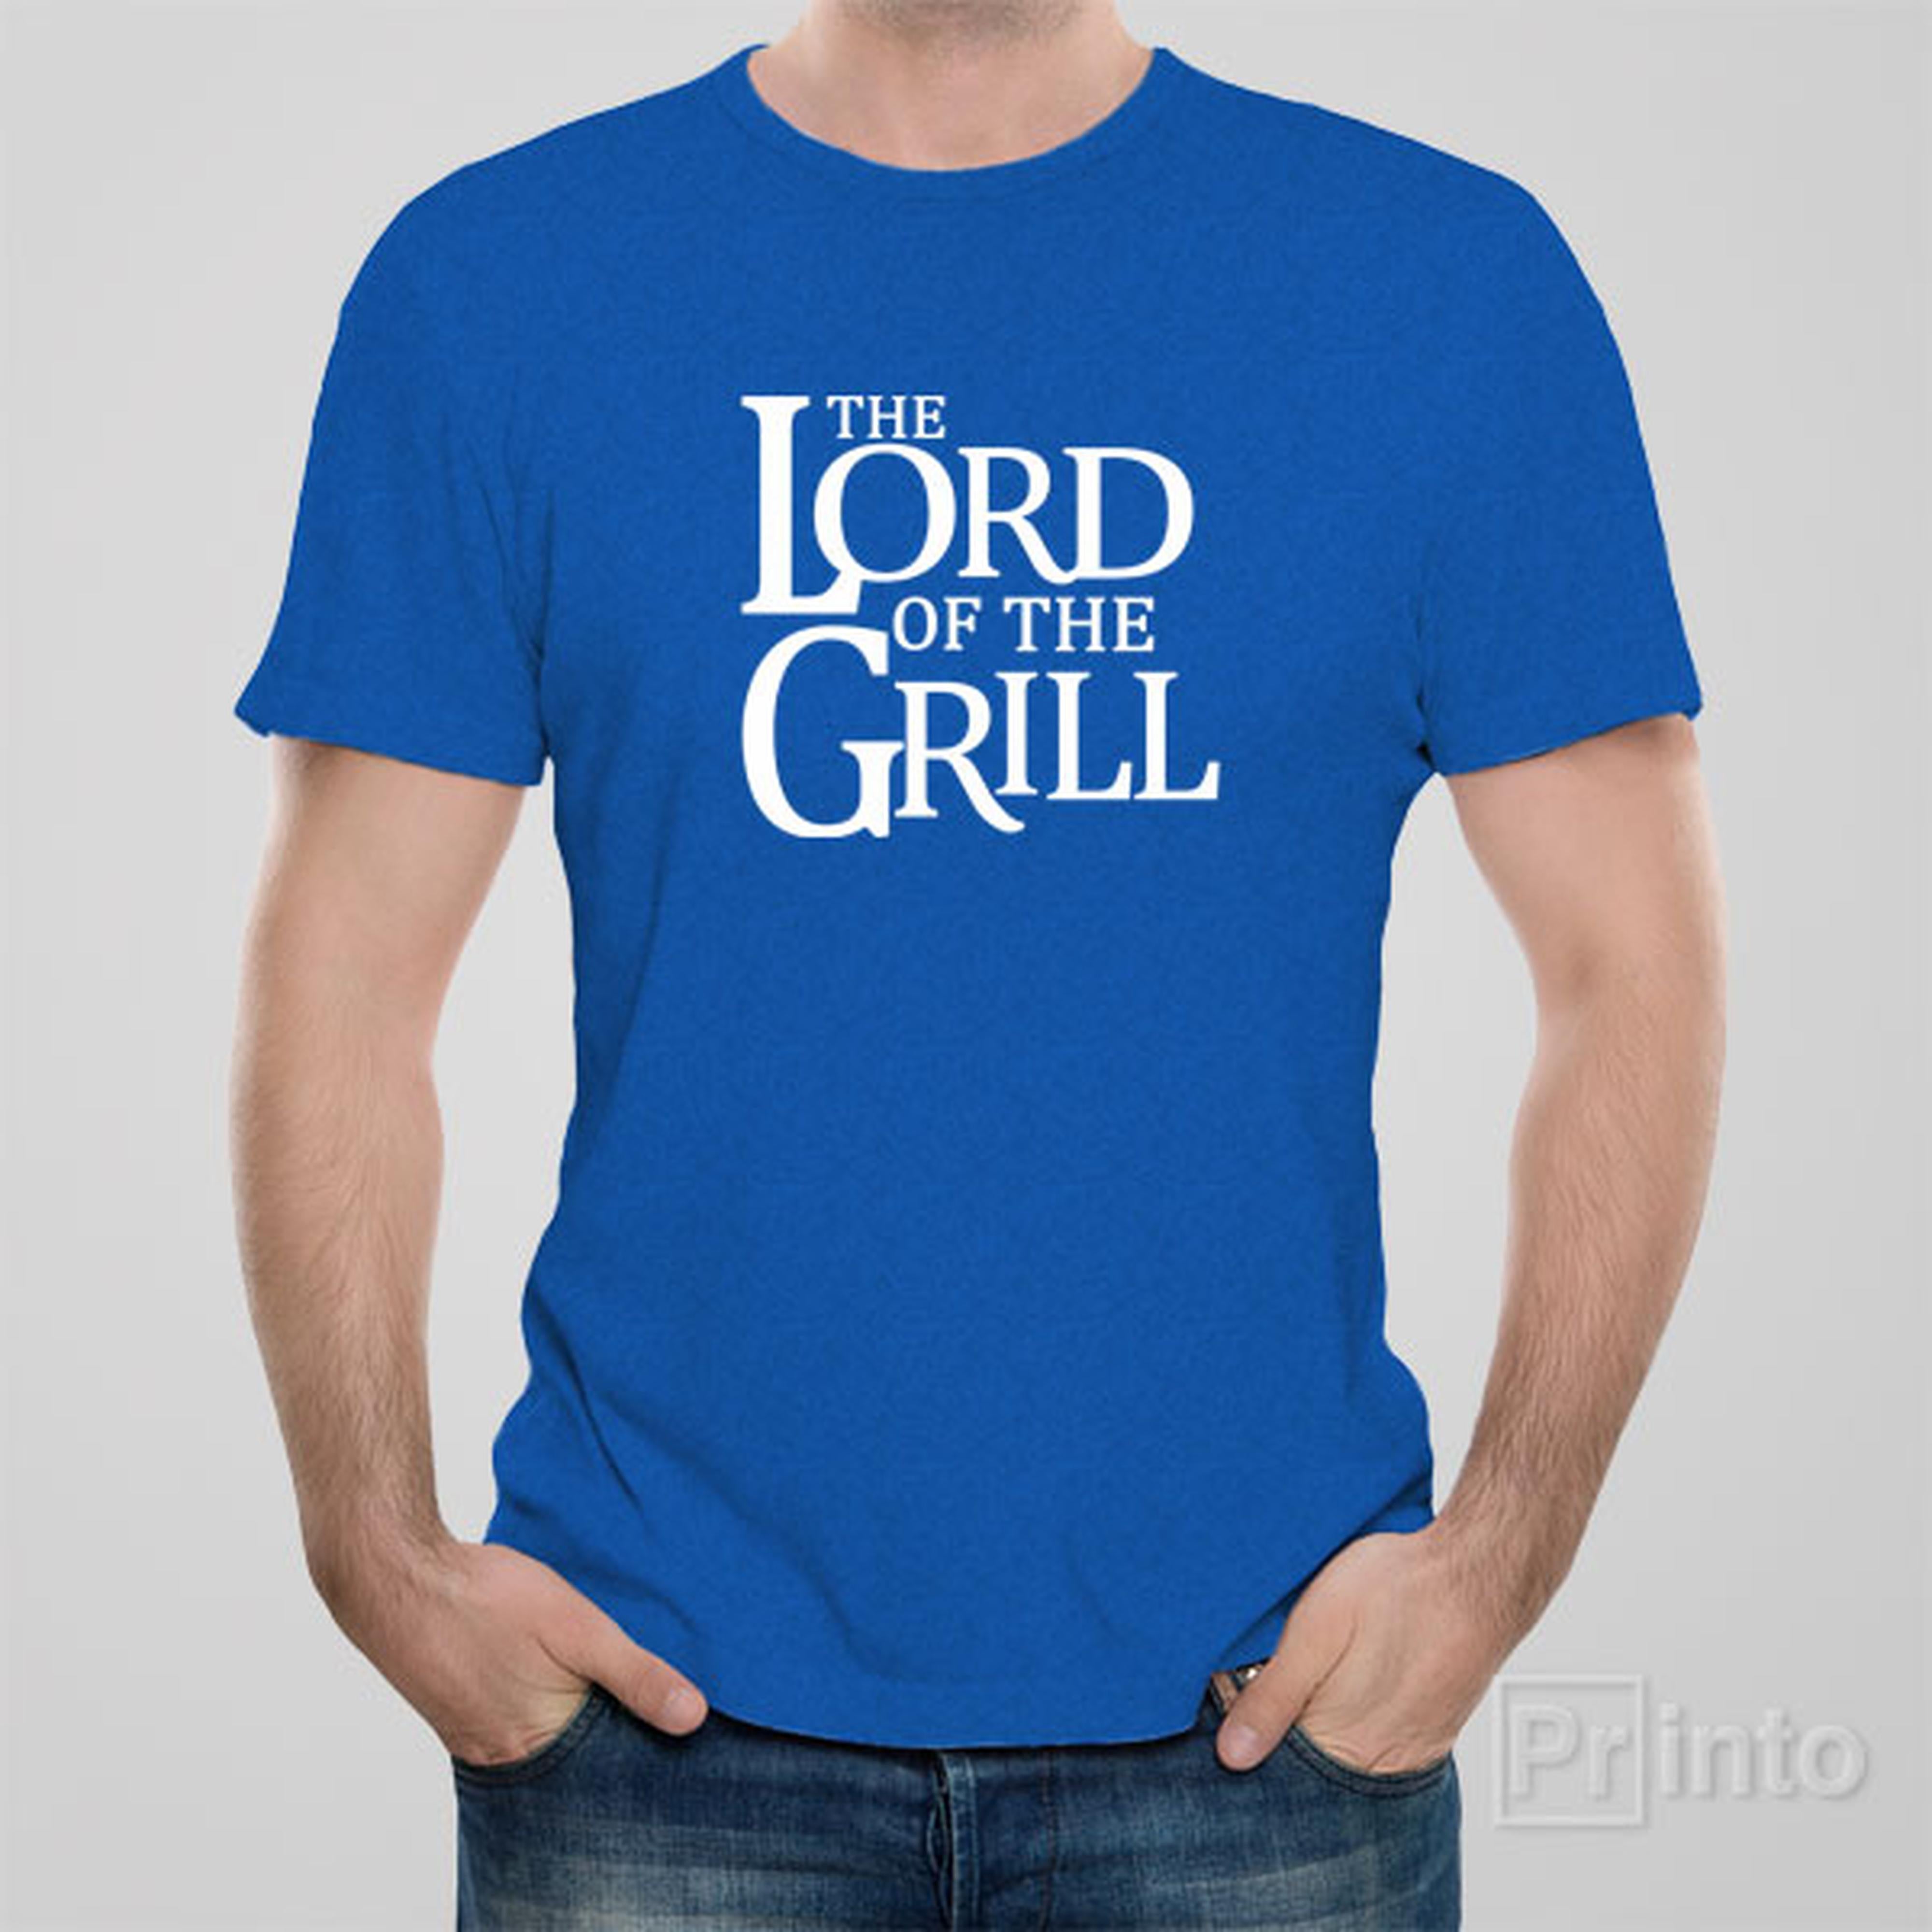 the-lord-of-the-grill-t-shirt